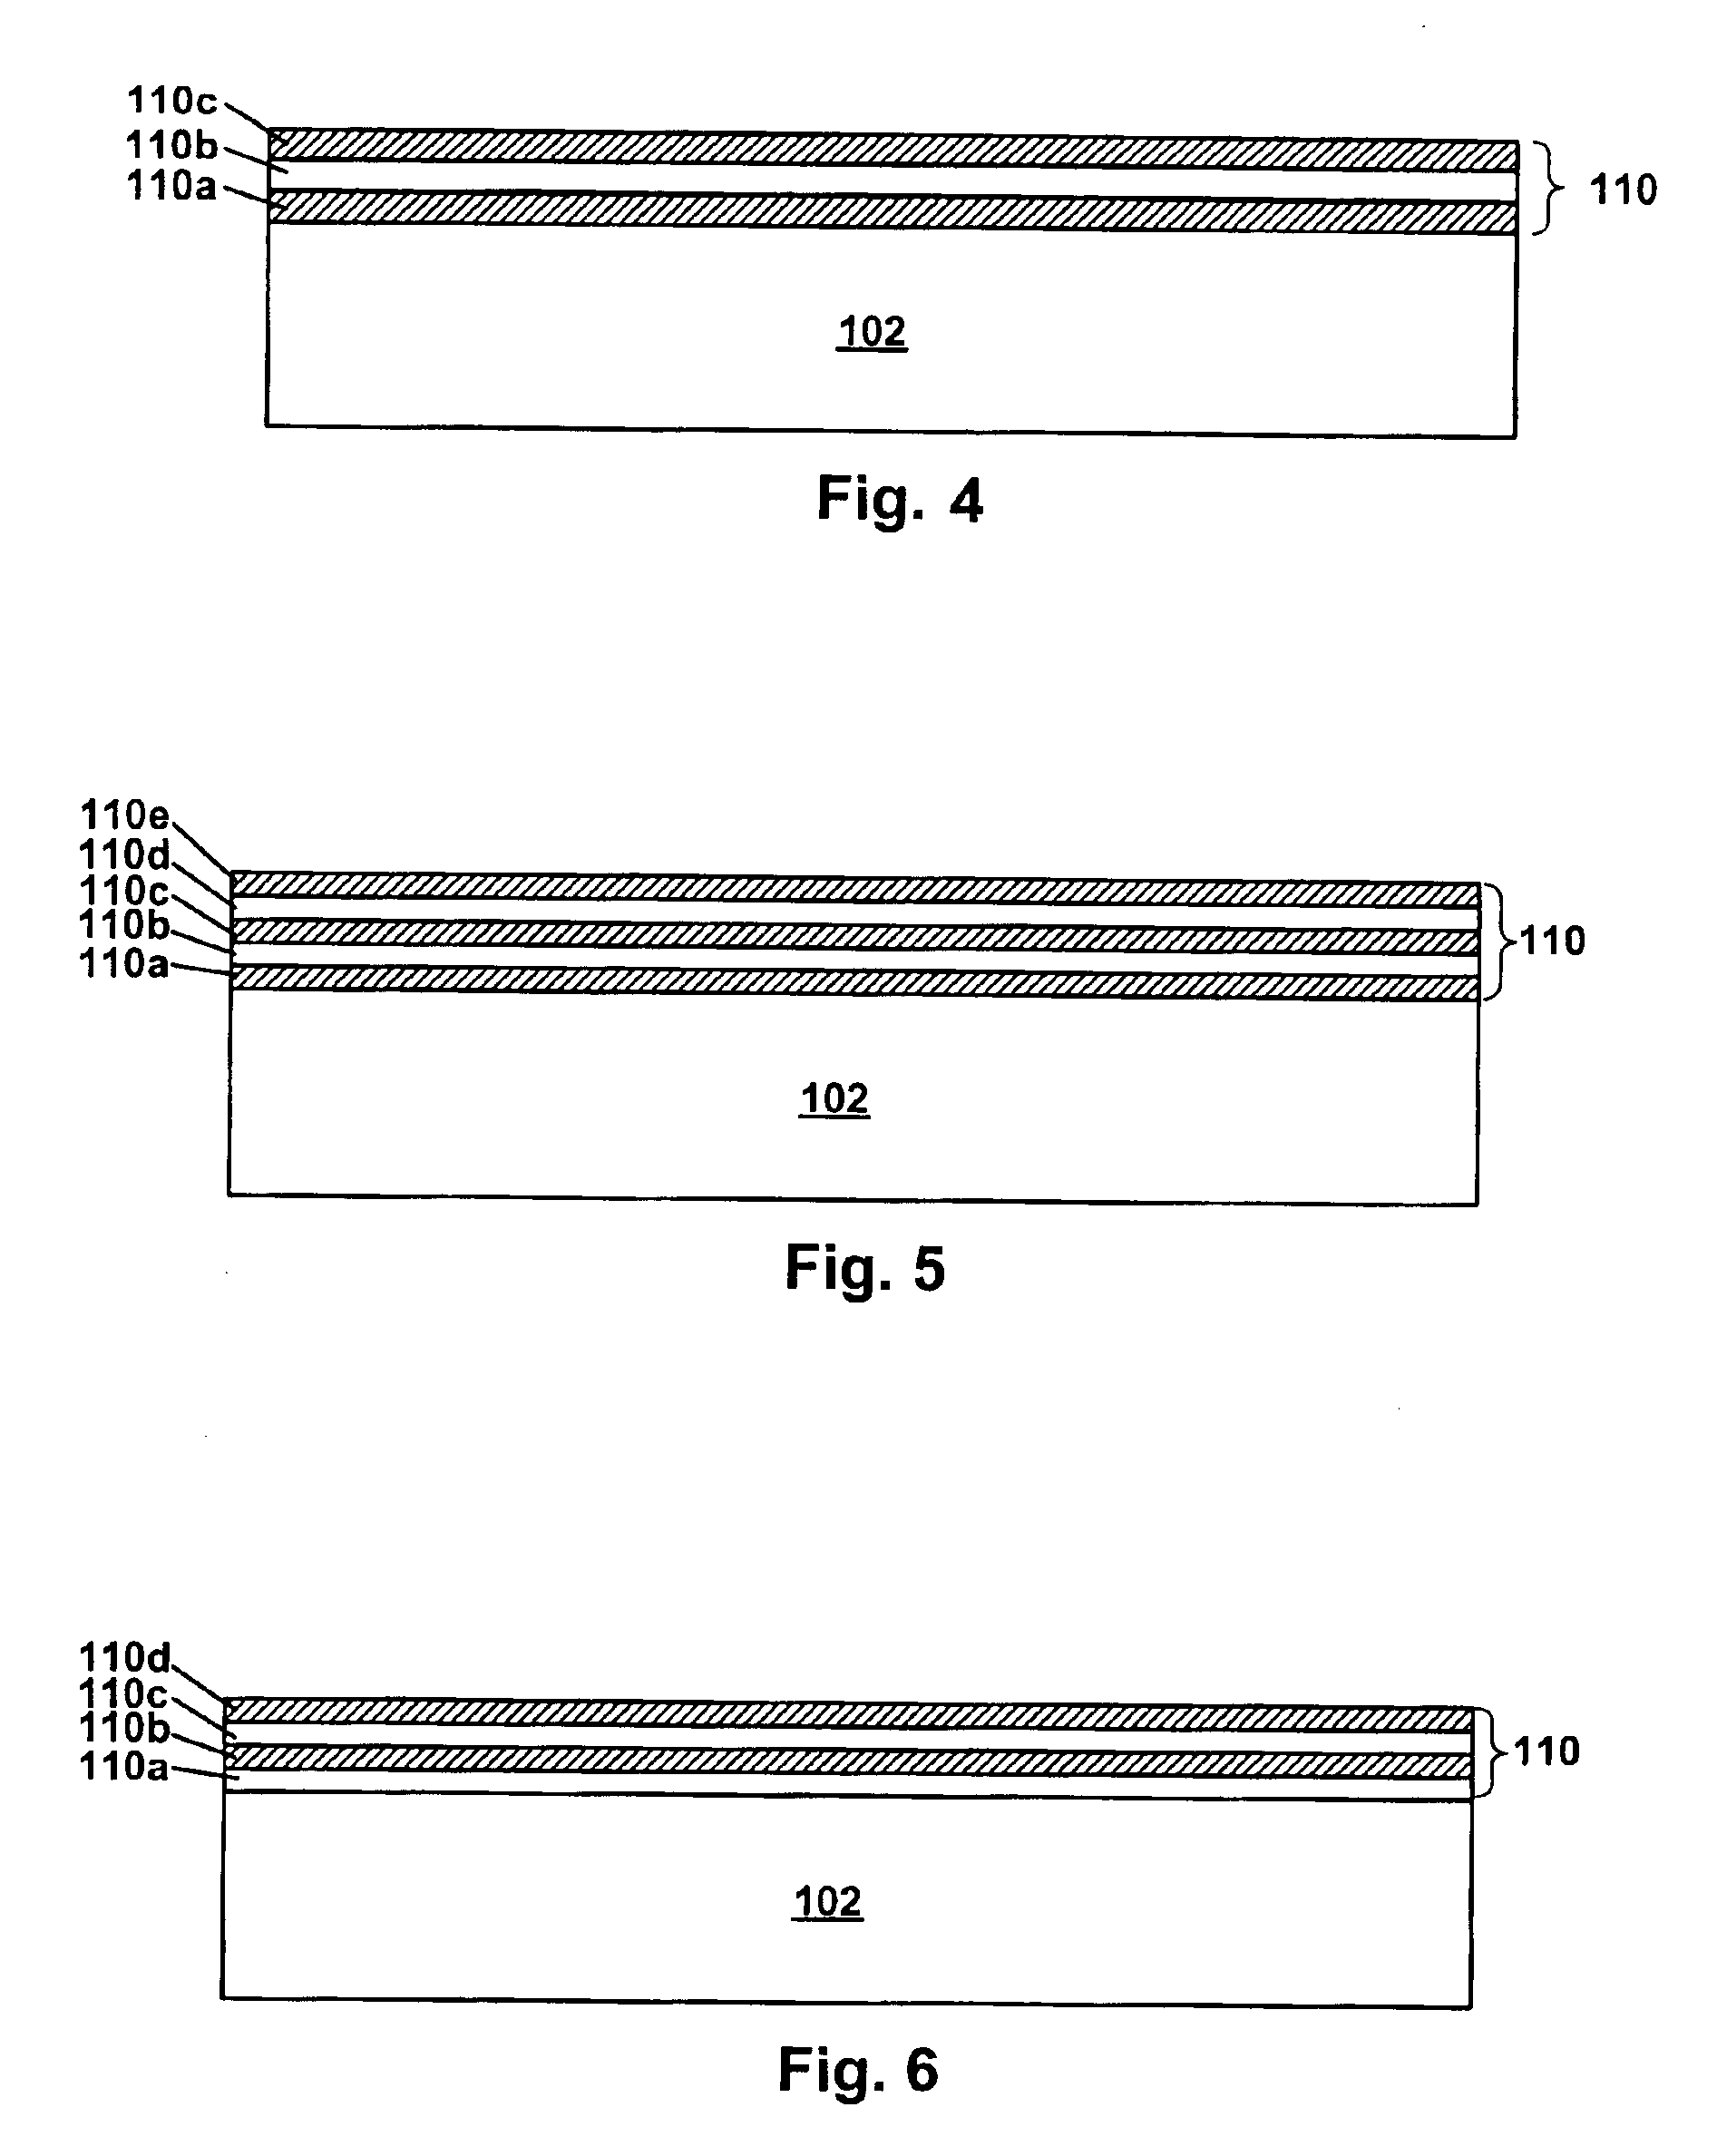 Preparation of composite high-K/standard-K dielectrics for semiconductor devices